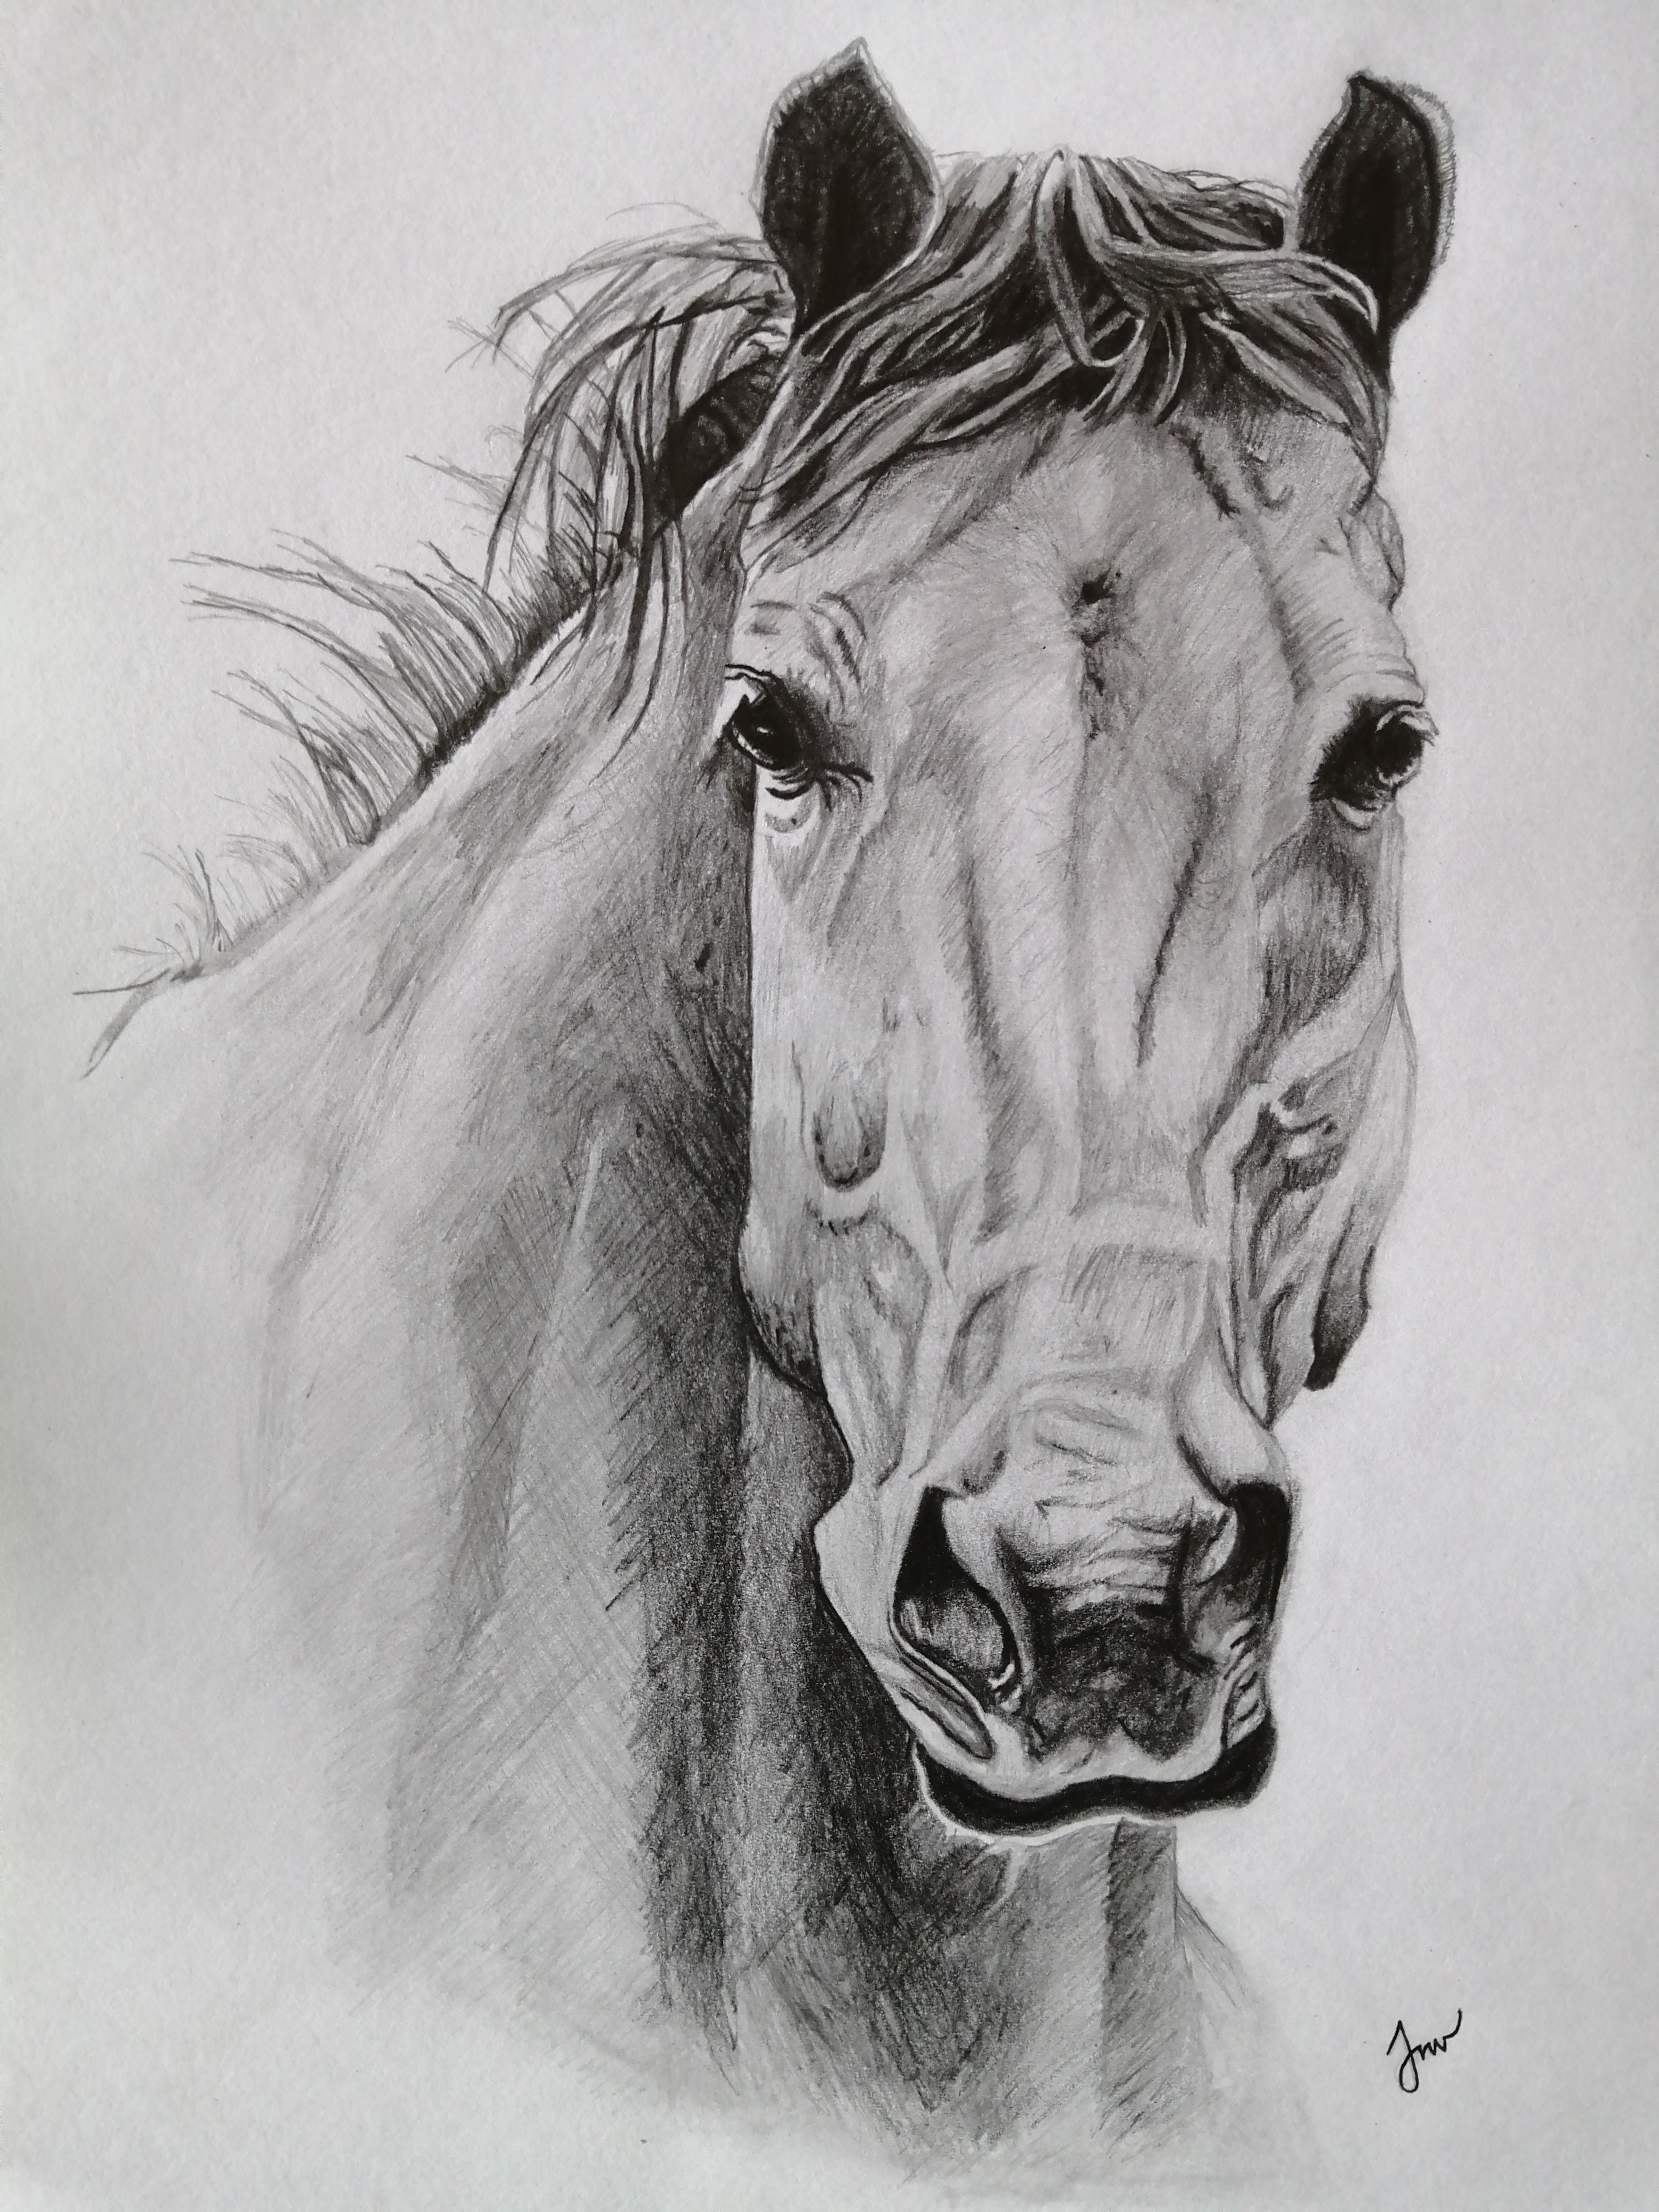 Horse Pencil Portraits - Commission Your Own Here